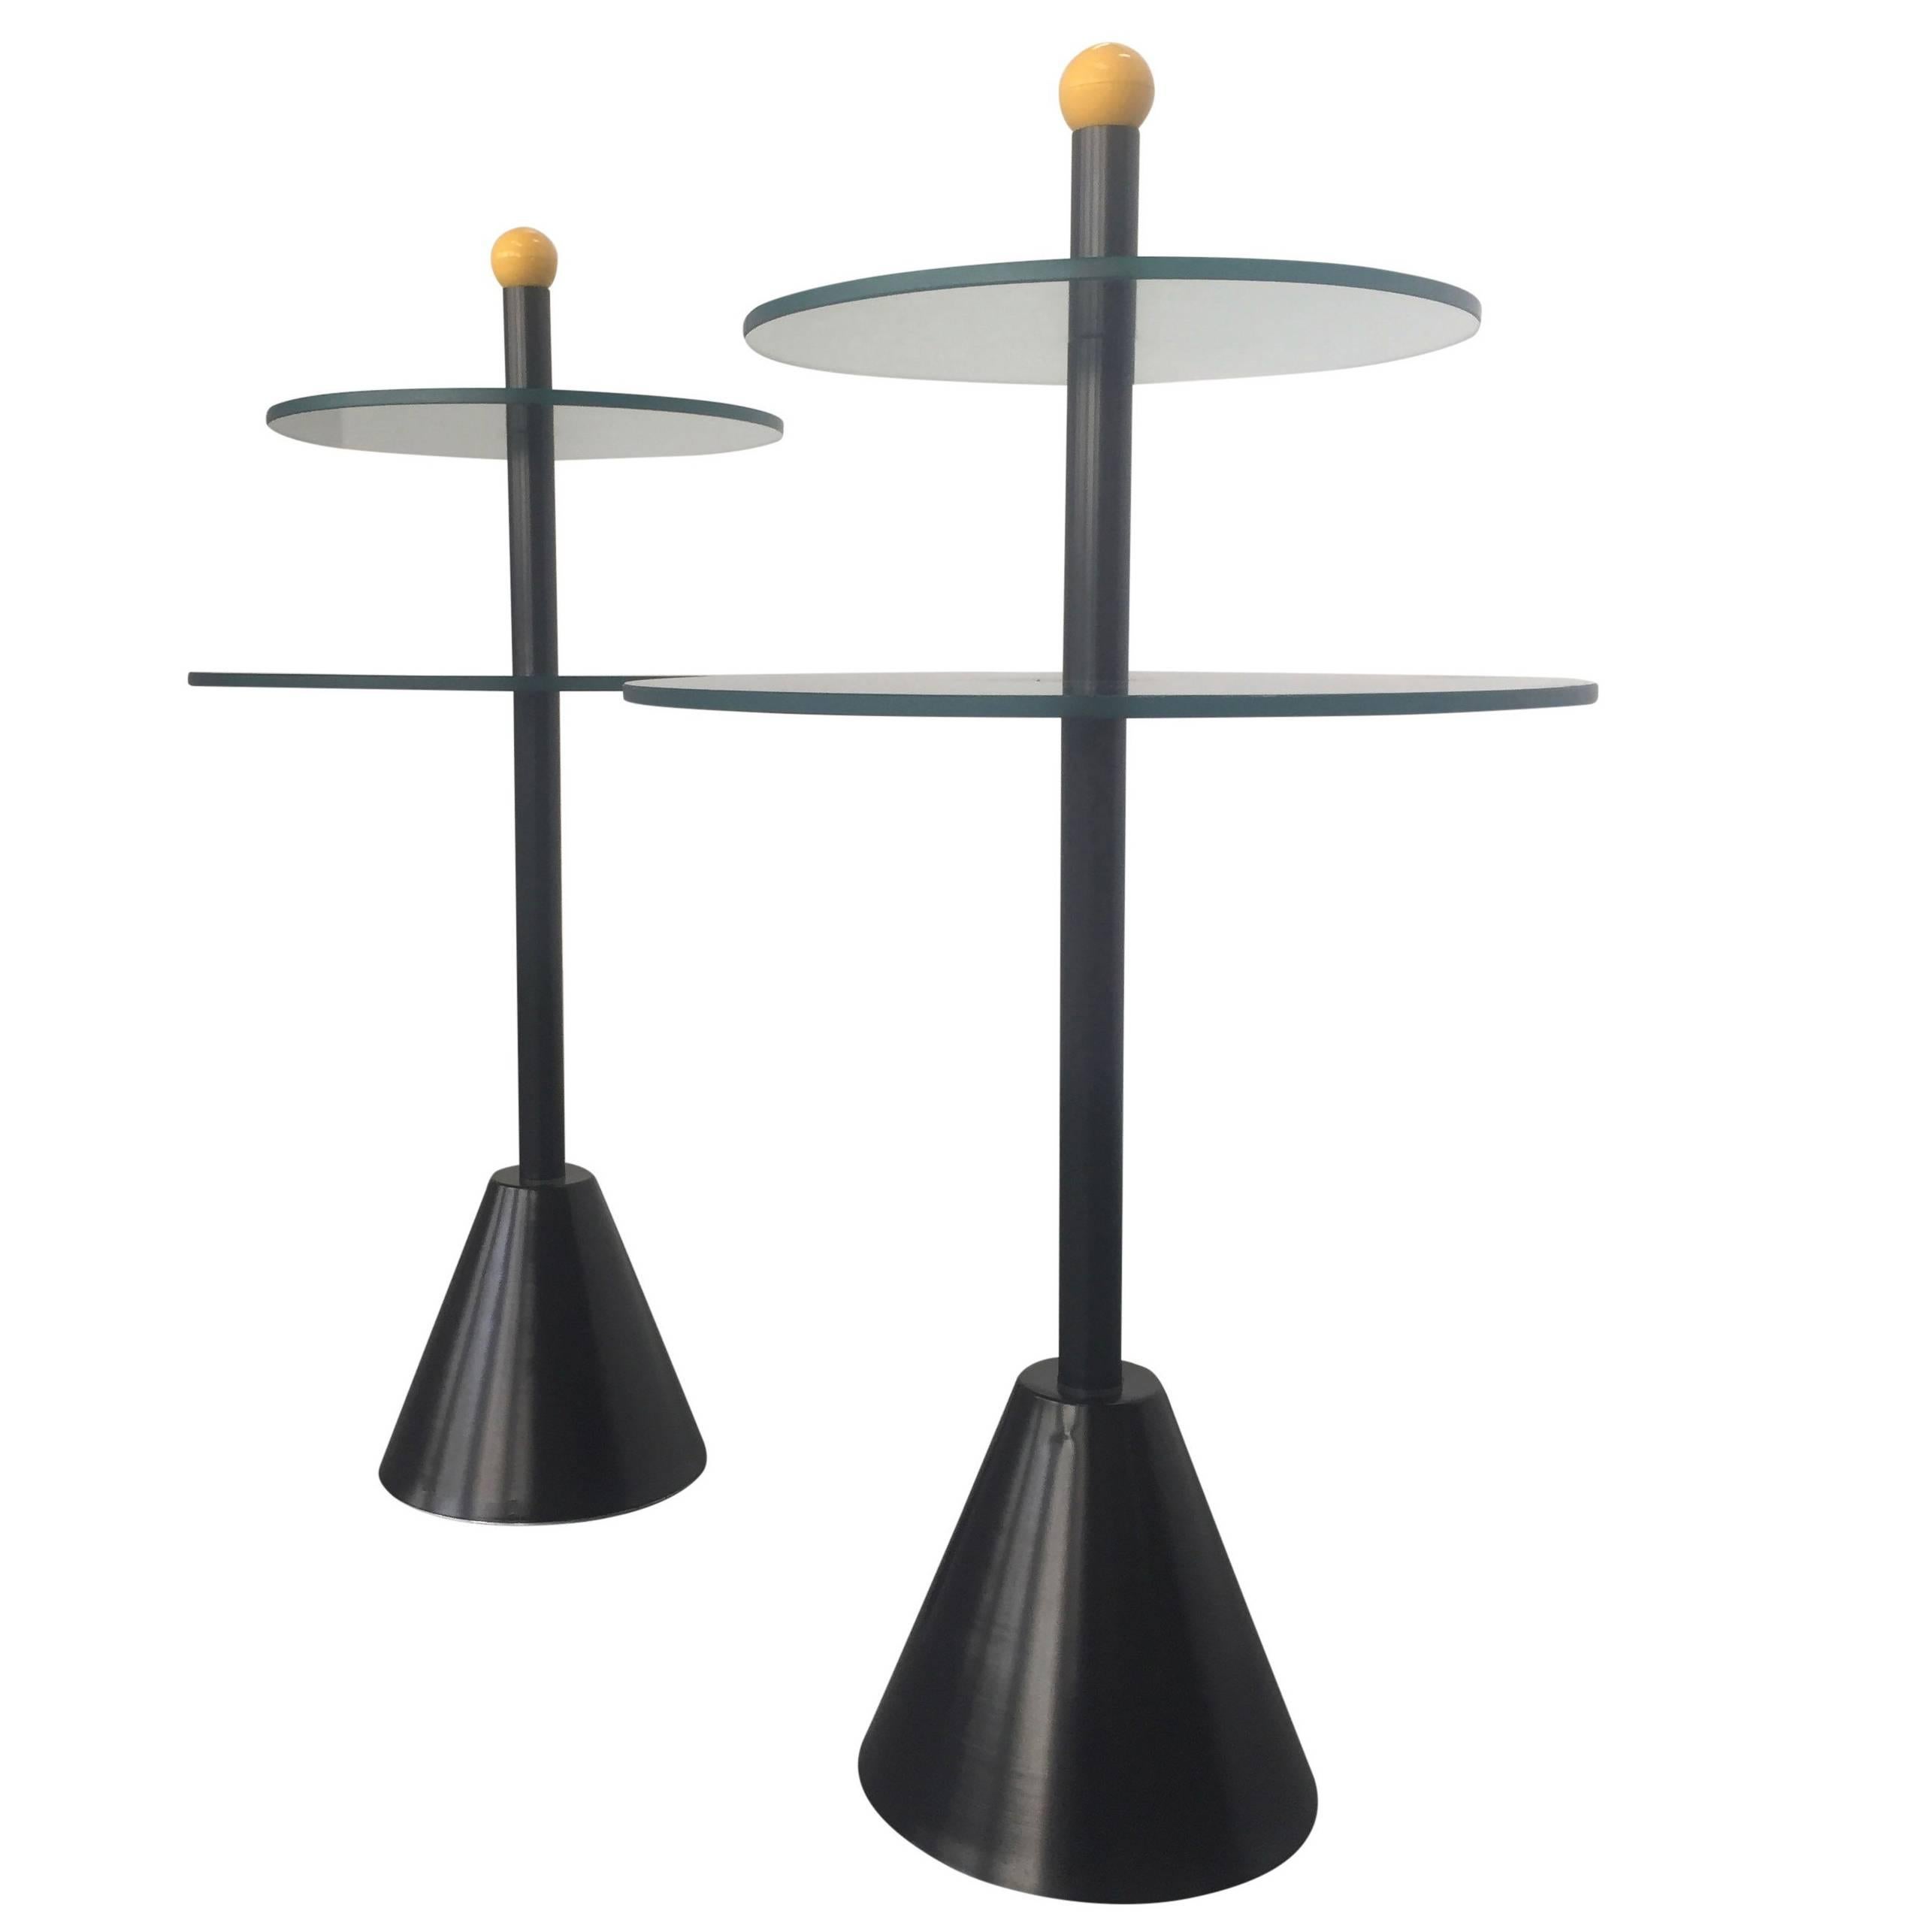 Memphis Side Tables of Glass and Enameled Steel, Sottsass, de Lucchi Style